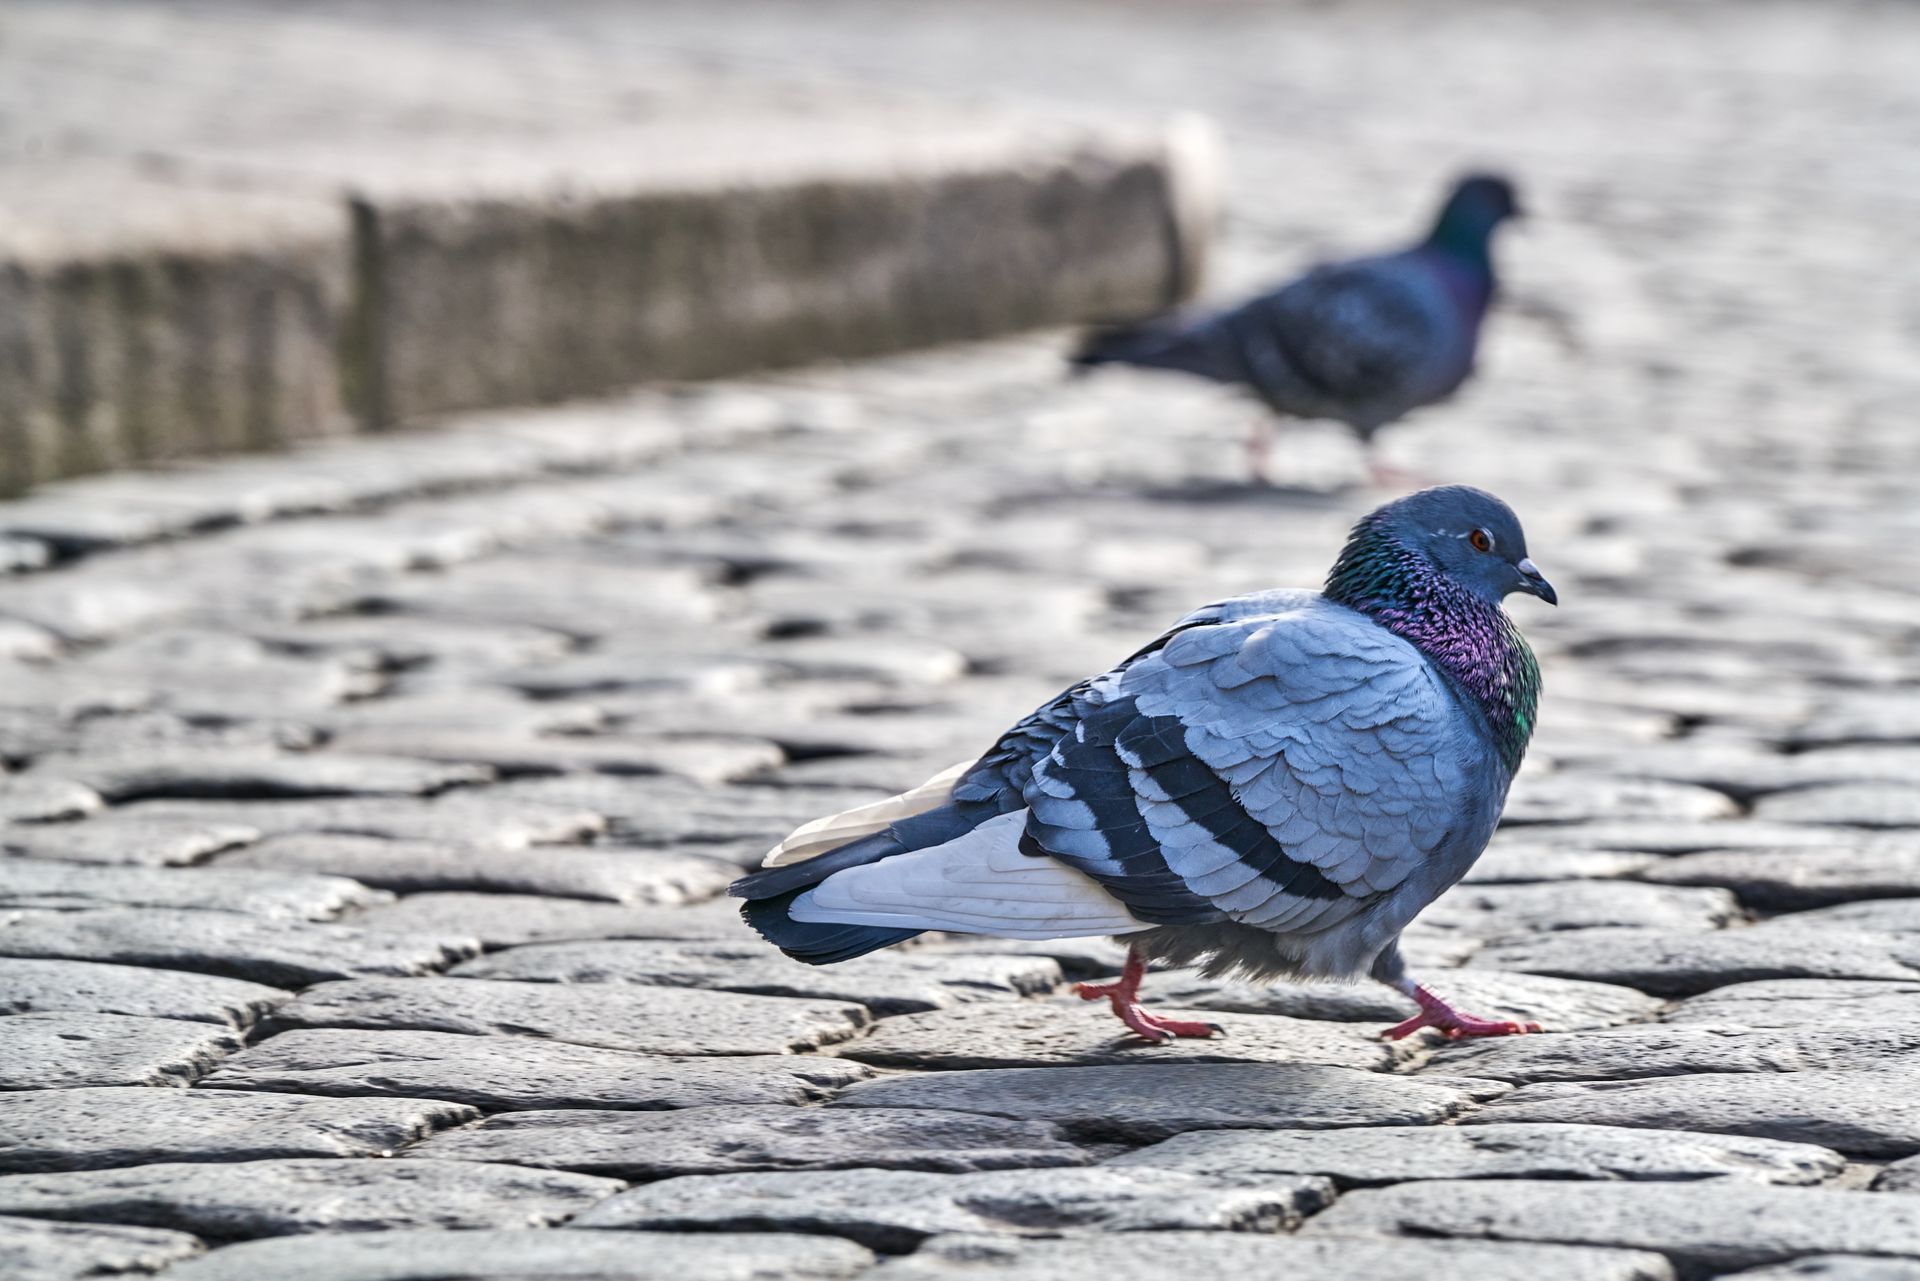 The City of Henderson Declares Pigeons a Public Nuisance